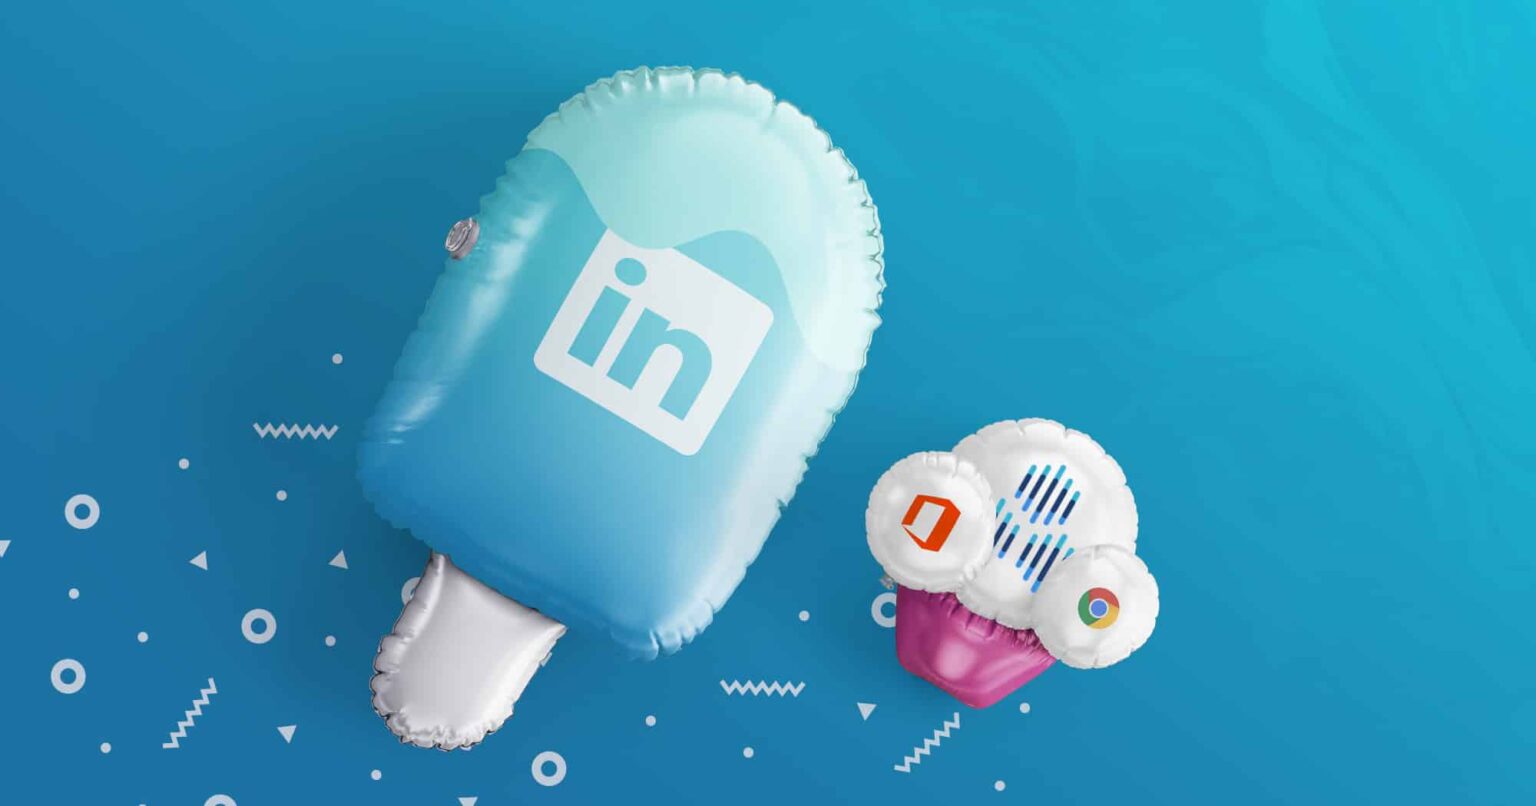 New LinkedIn Integration and More Reply Updates [August 2020]